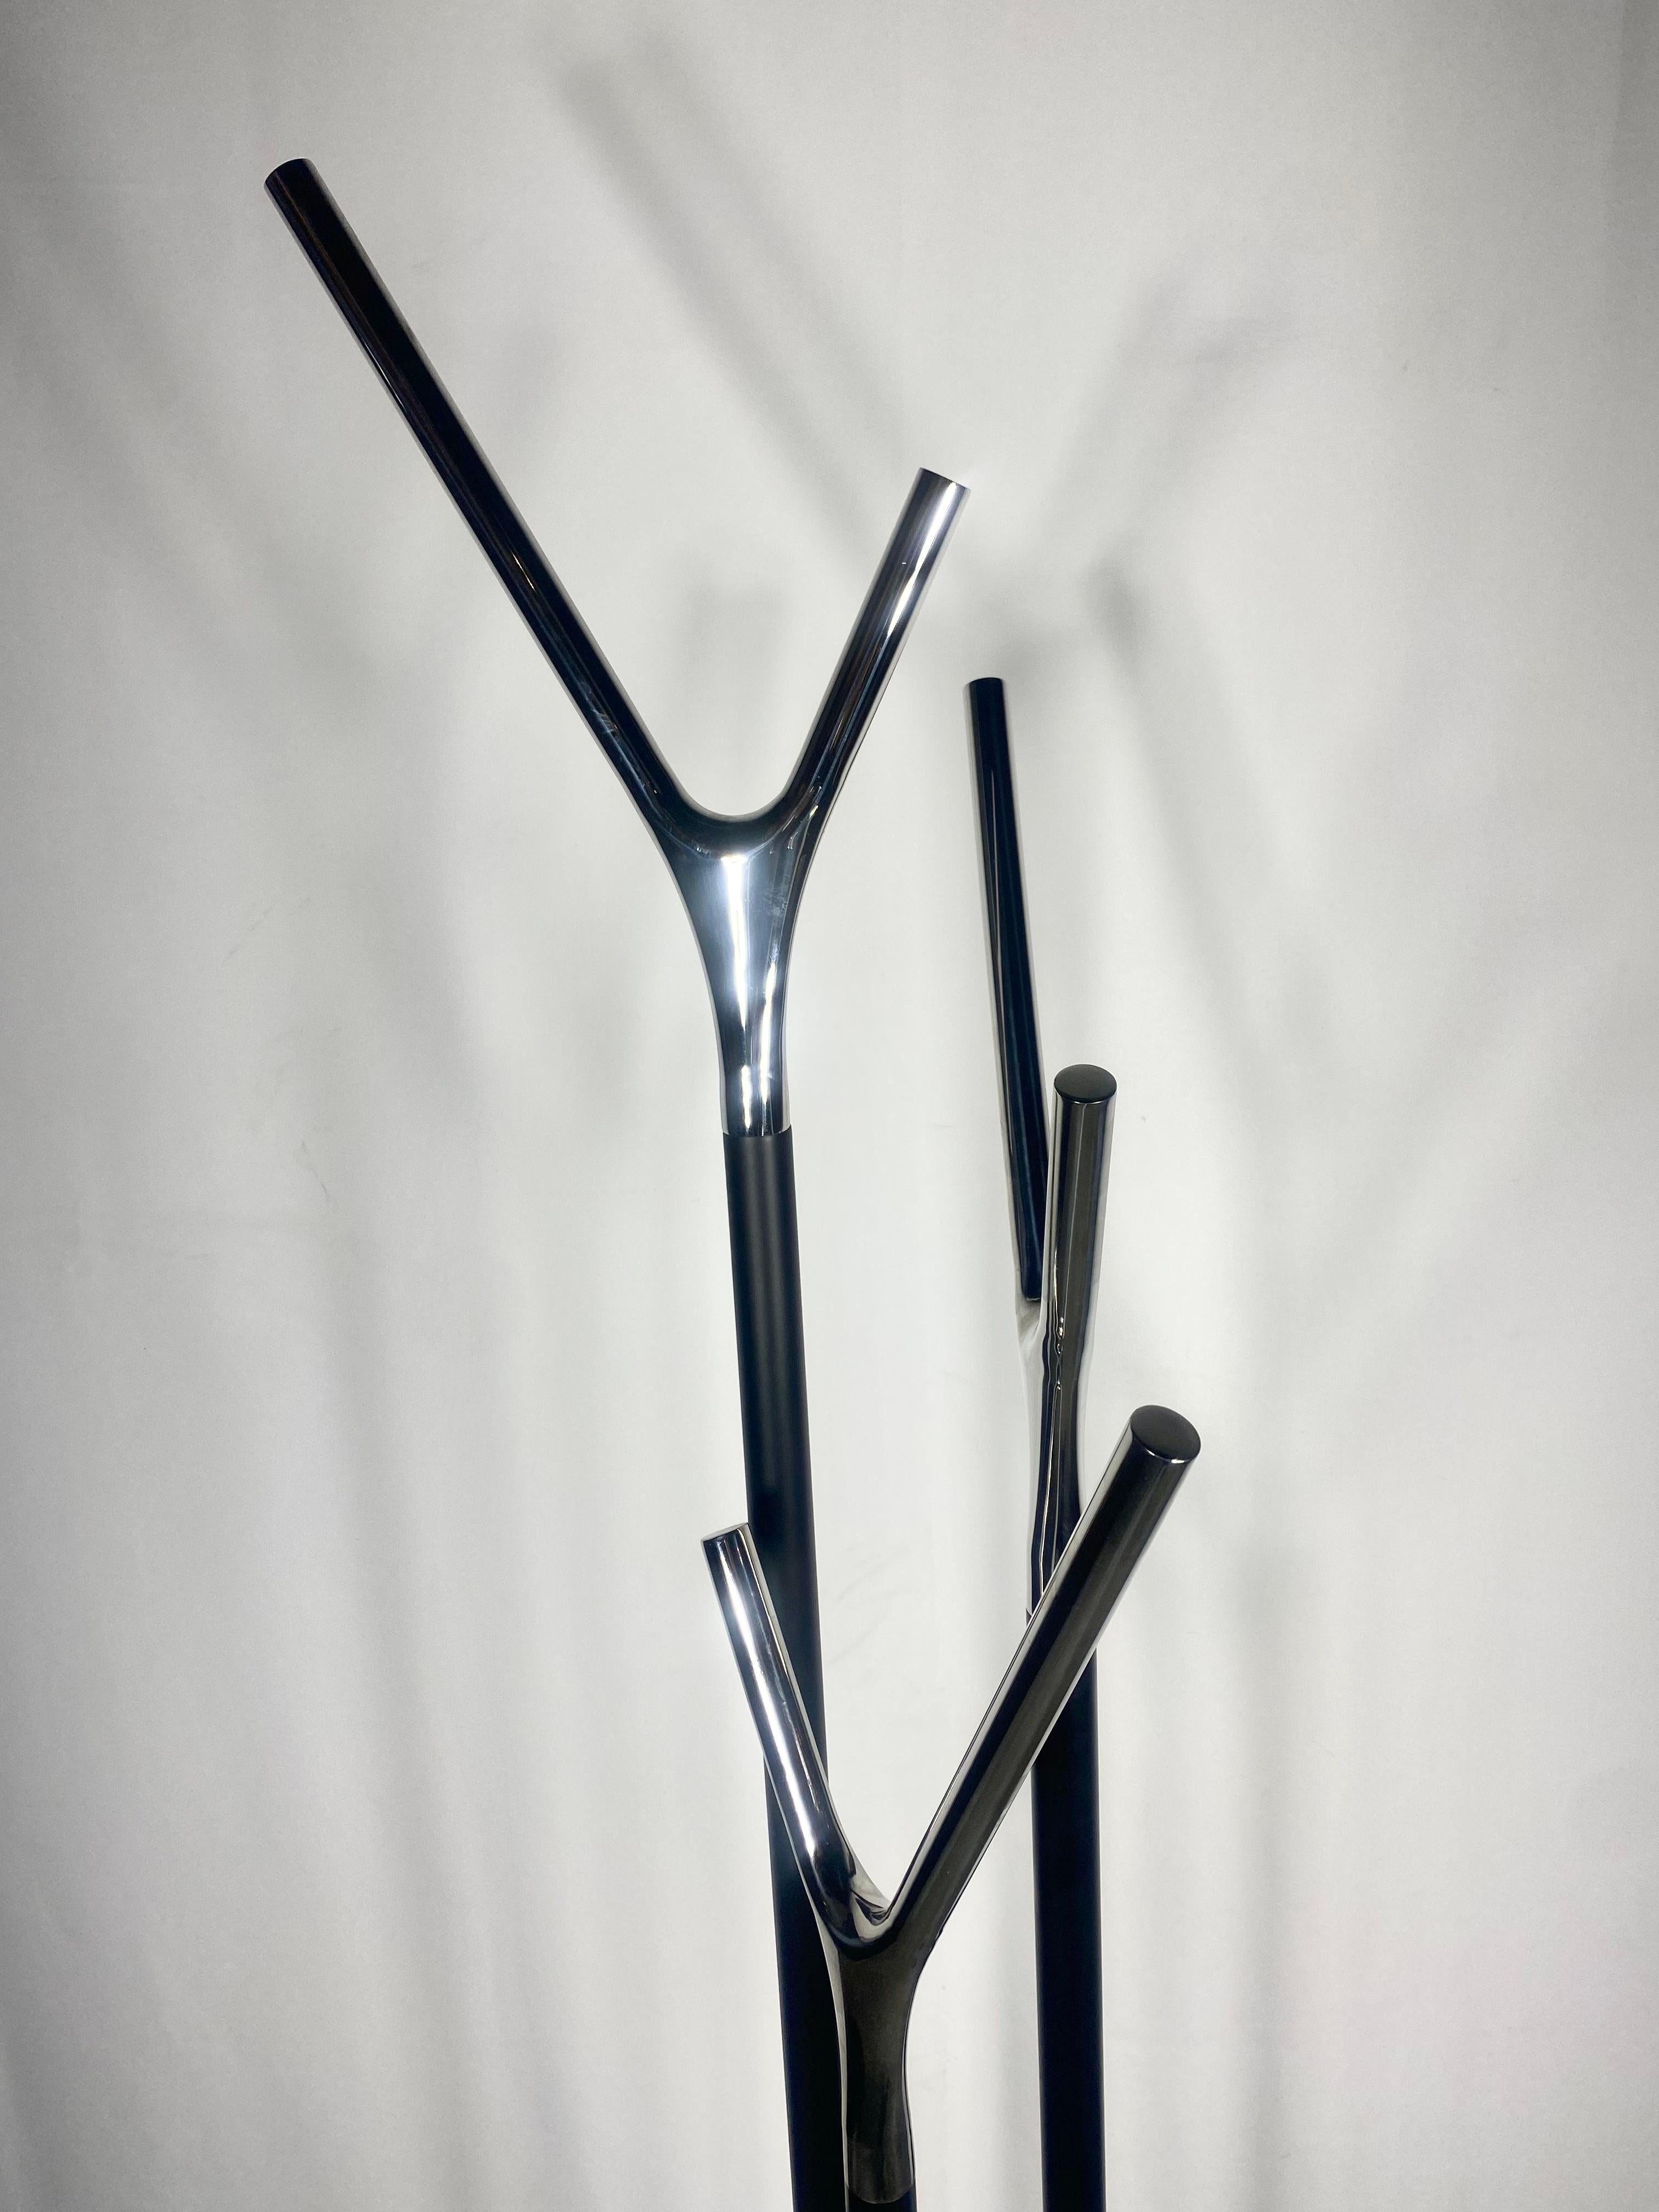 Modernist Contemporary Wishbone Coat Stand - Mirror Chrome by Busk+Hertzog In Good Condition For Sale In Buffalo, NY